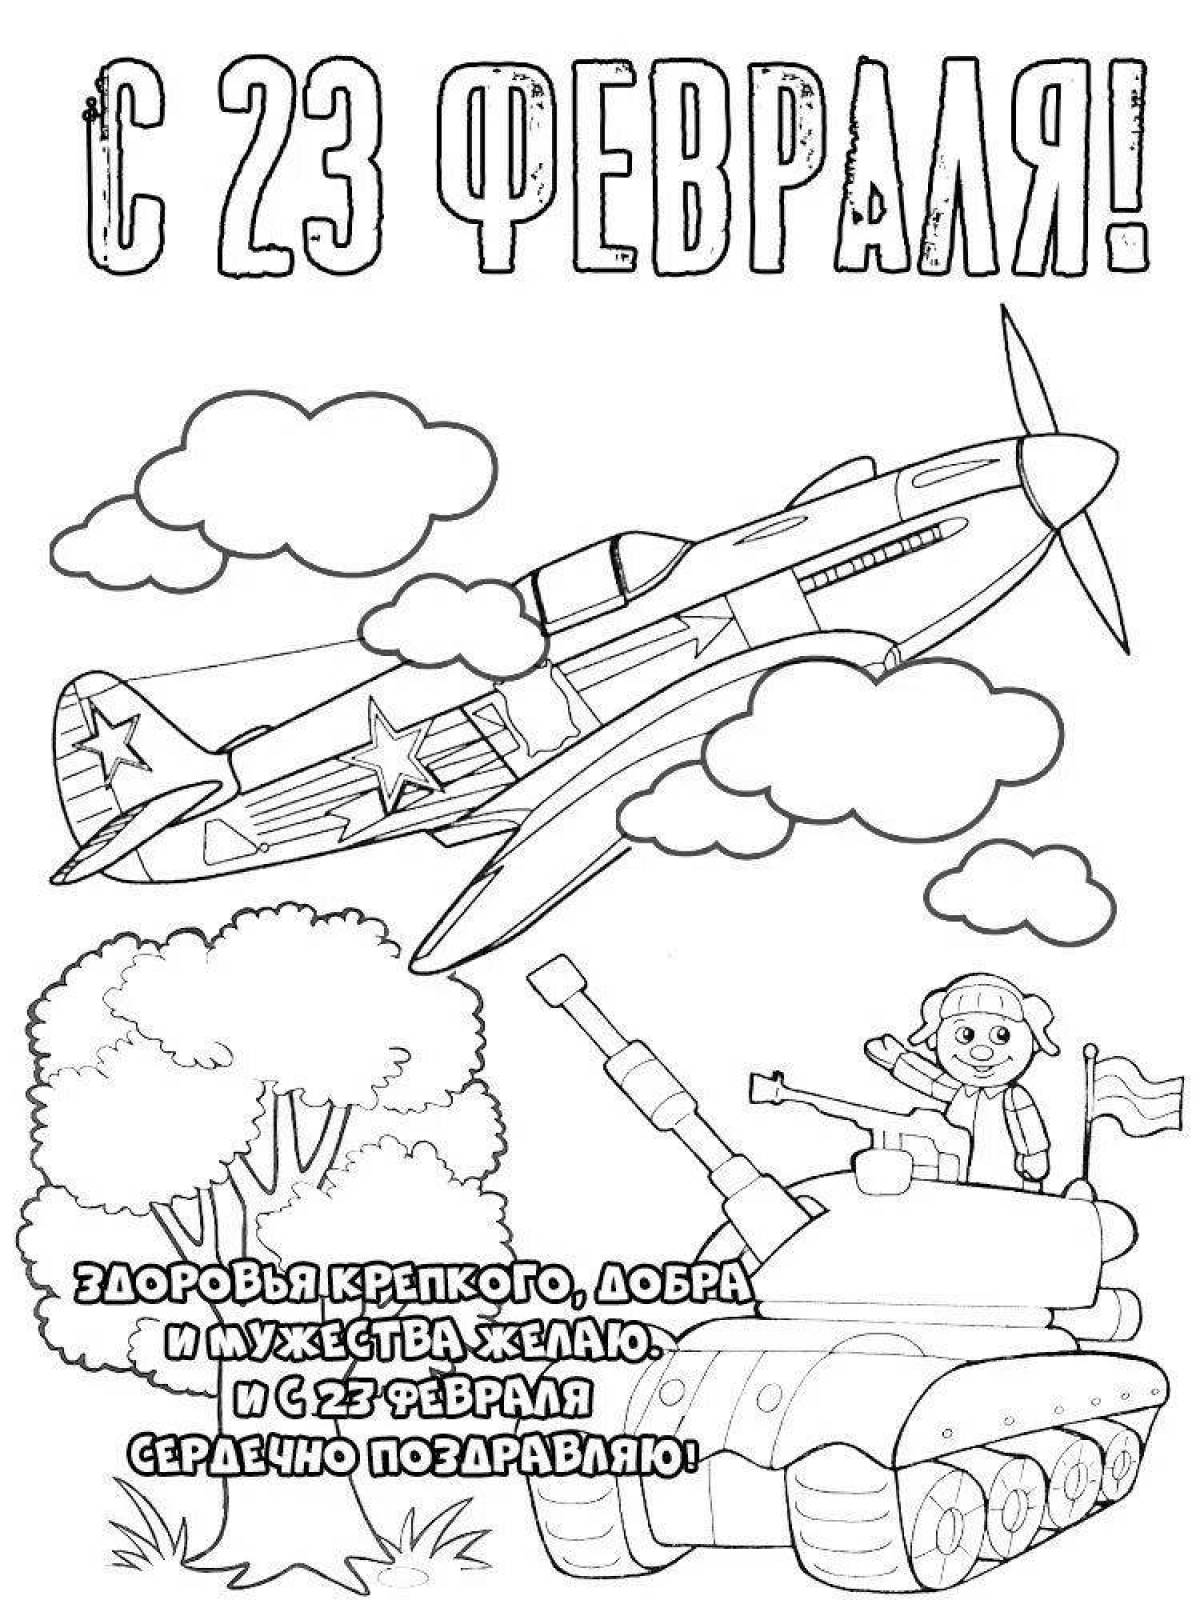 Rich defender of the fatherland coloring page